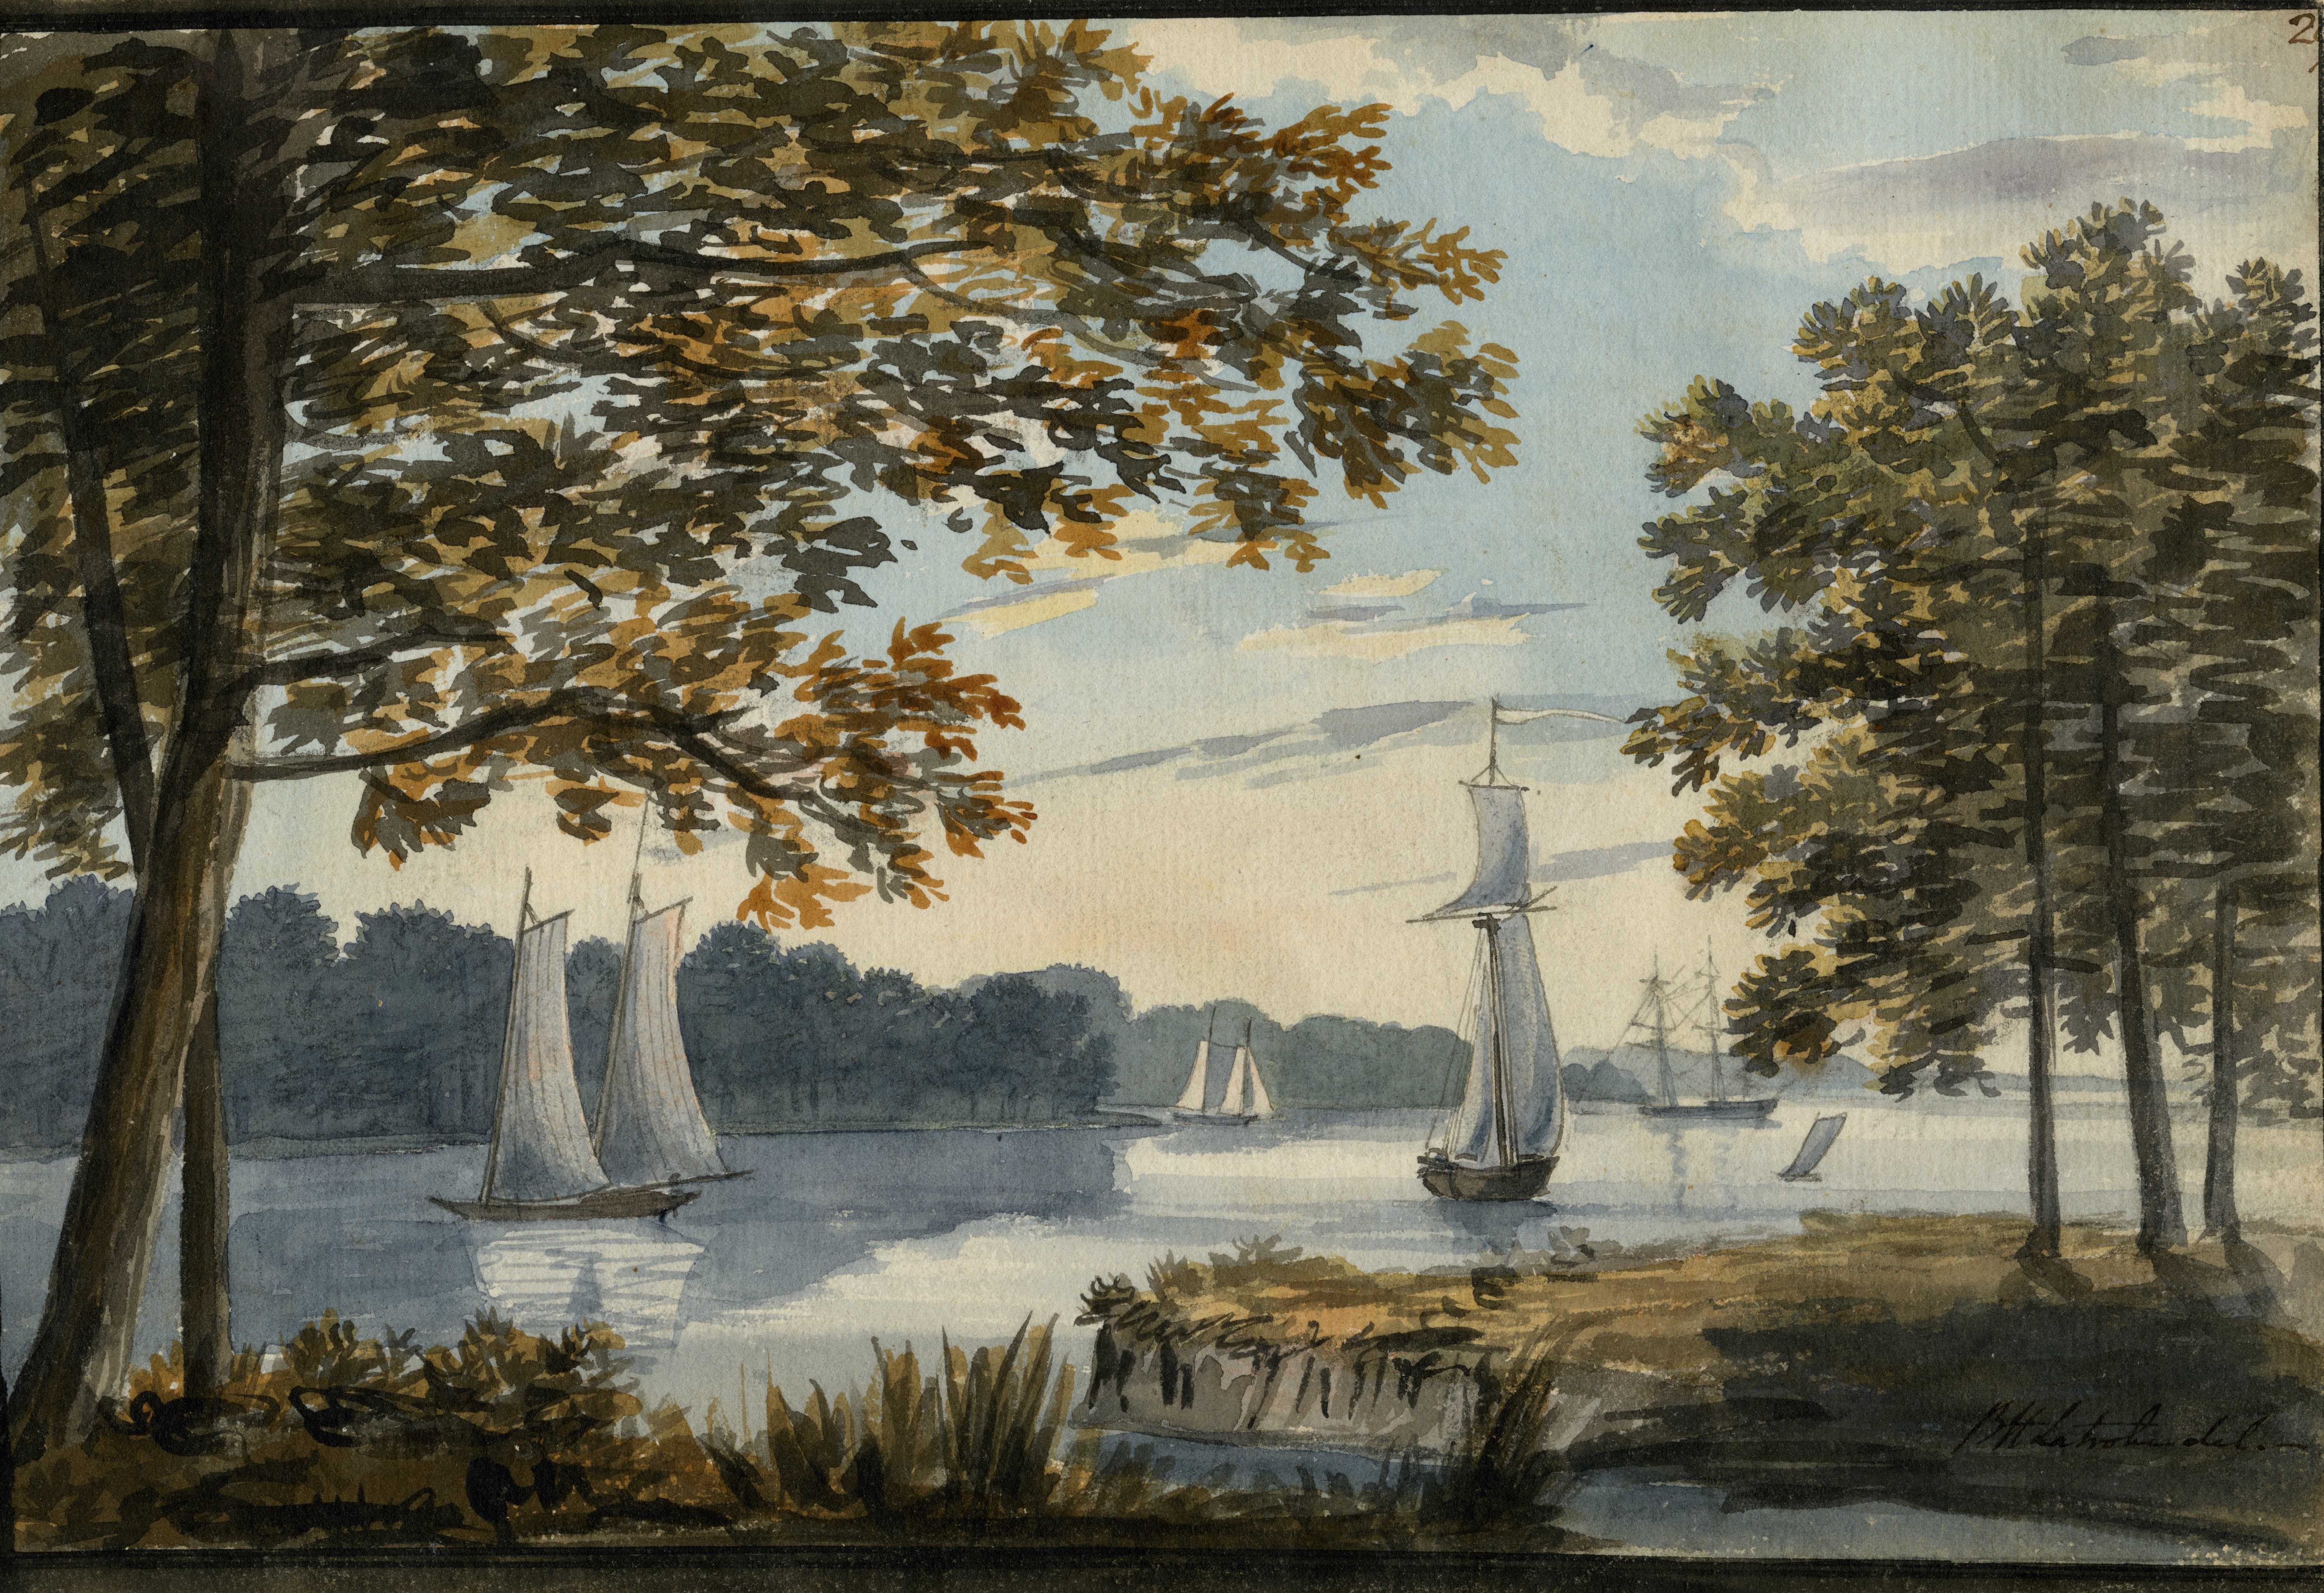 1796, watercolour, 17.7 × 26.6 cm. Collection of Maryland Historical Society (1960-108-1-1-26).